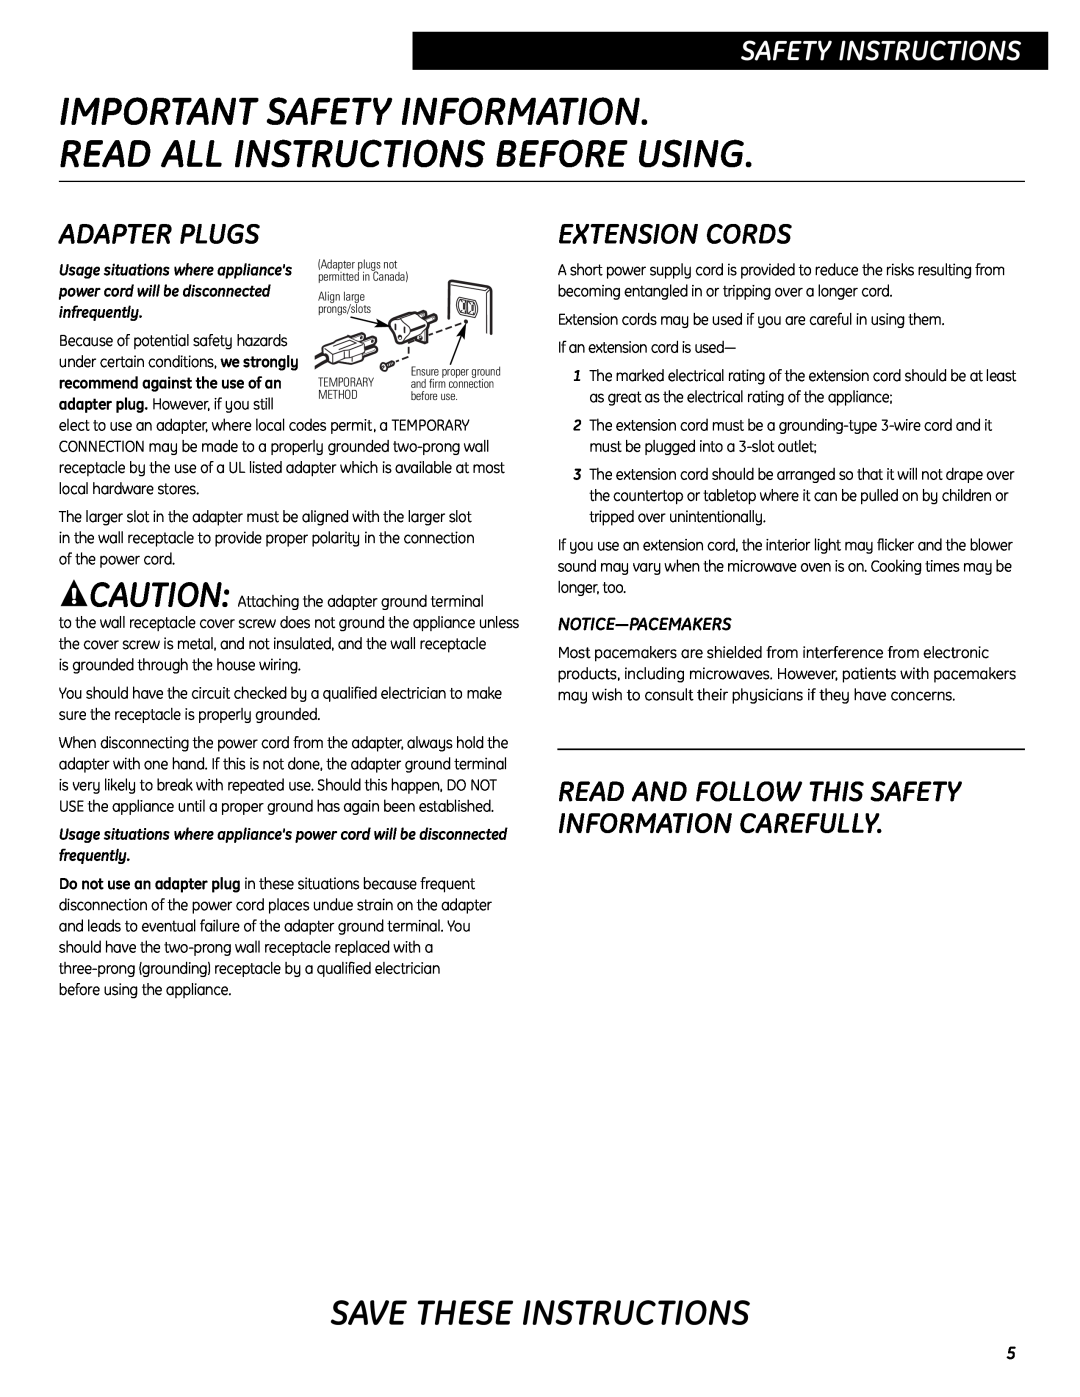 GE JES0737 quick start Adapter Plugs, Extension Cords, Important Safety Information, Read All Instructions Before Using 